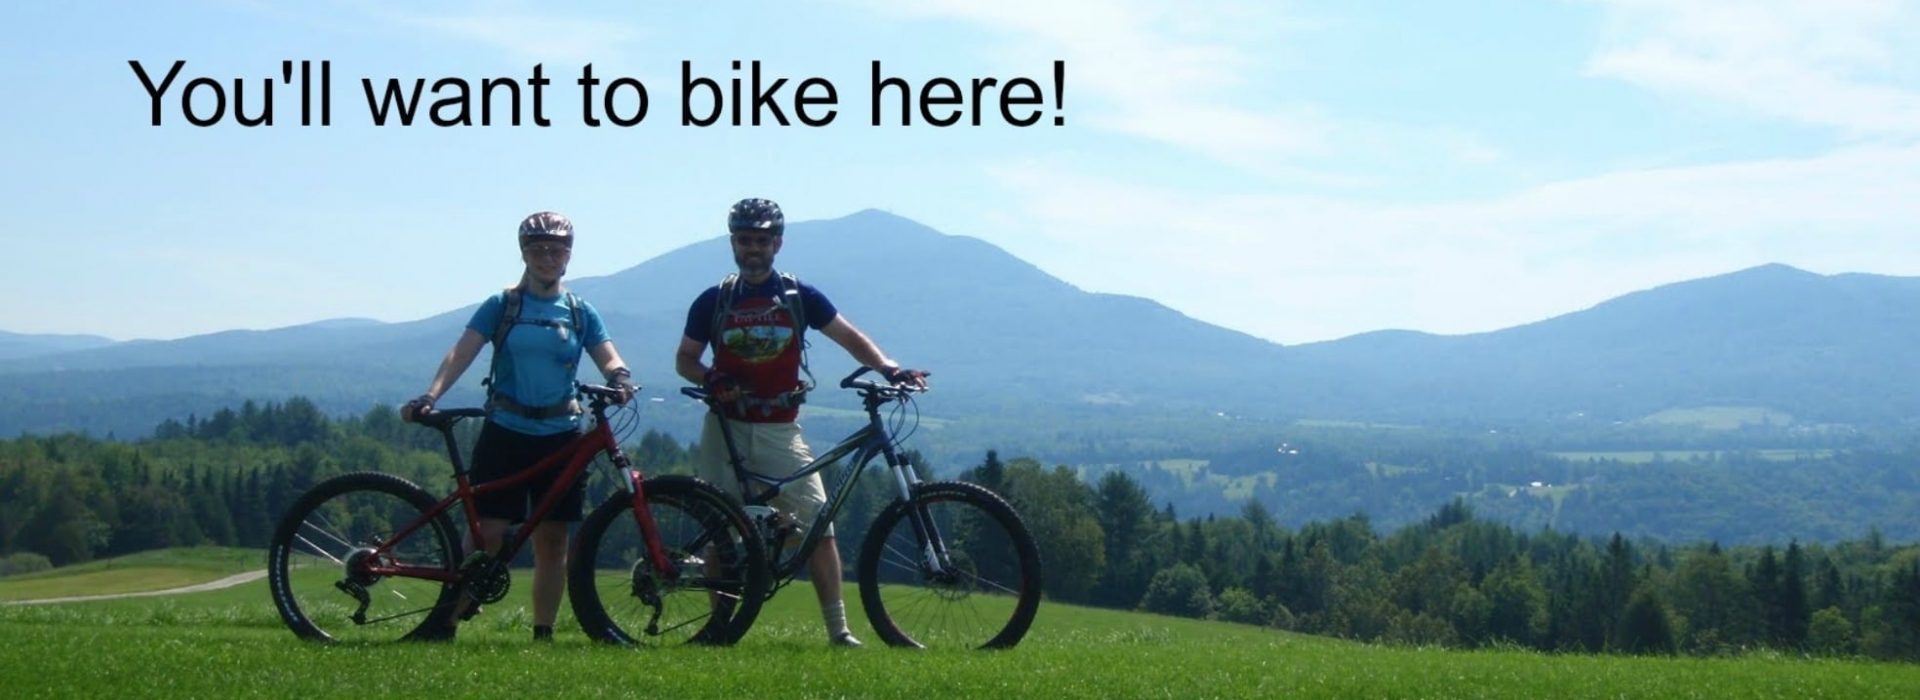 two people standing next to their mountain bikes on a grassy hill.